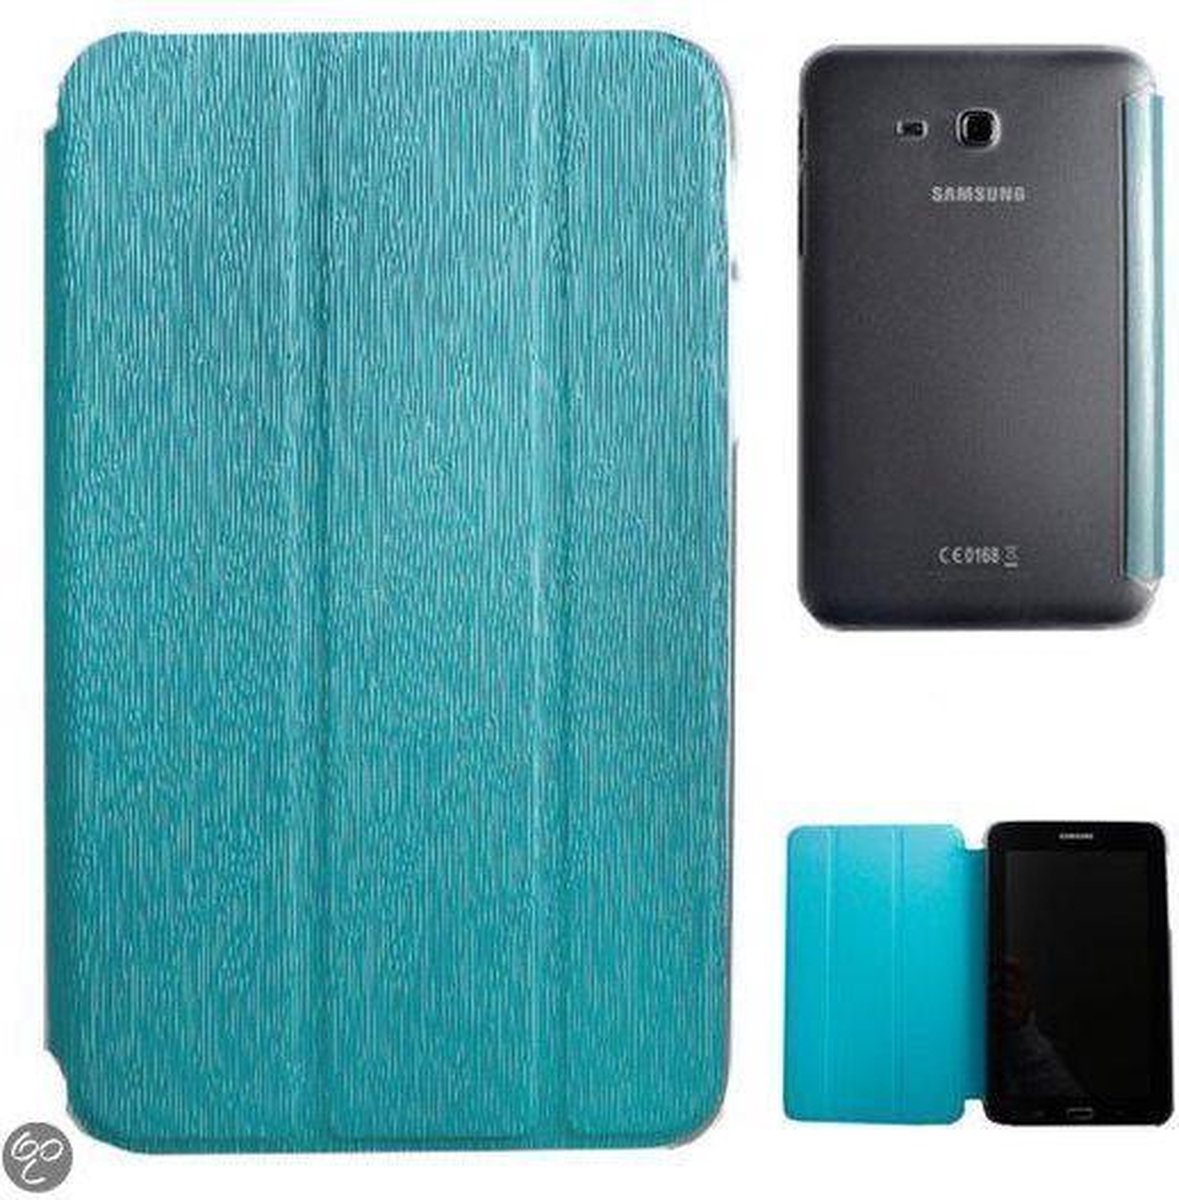 Samsung Galaxy Tab 3 7.0 T110 smart case met transparante achterkant Turquoise